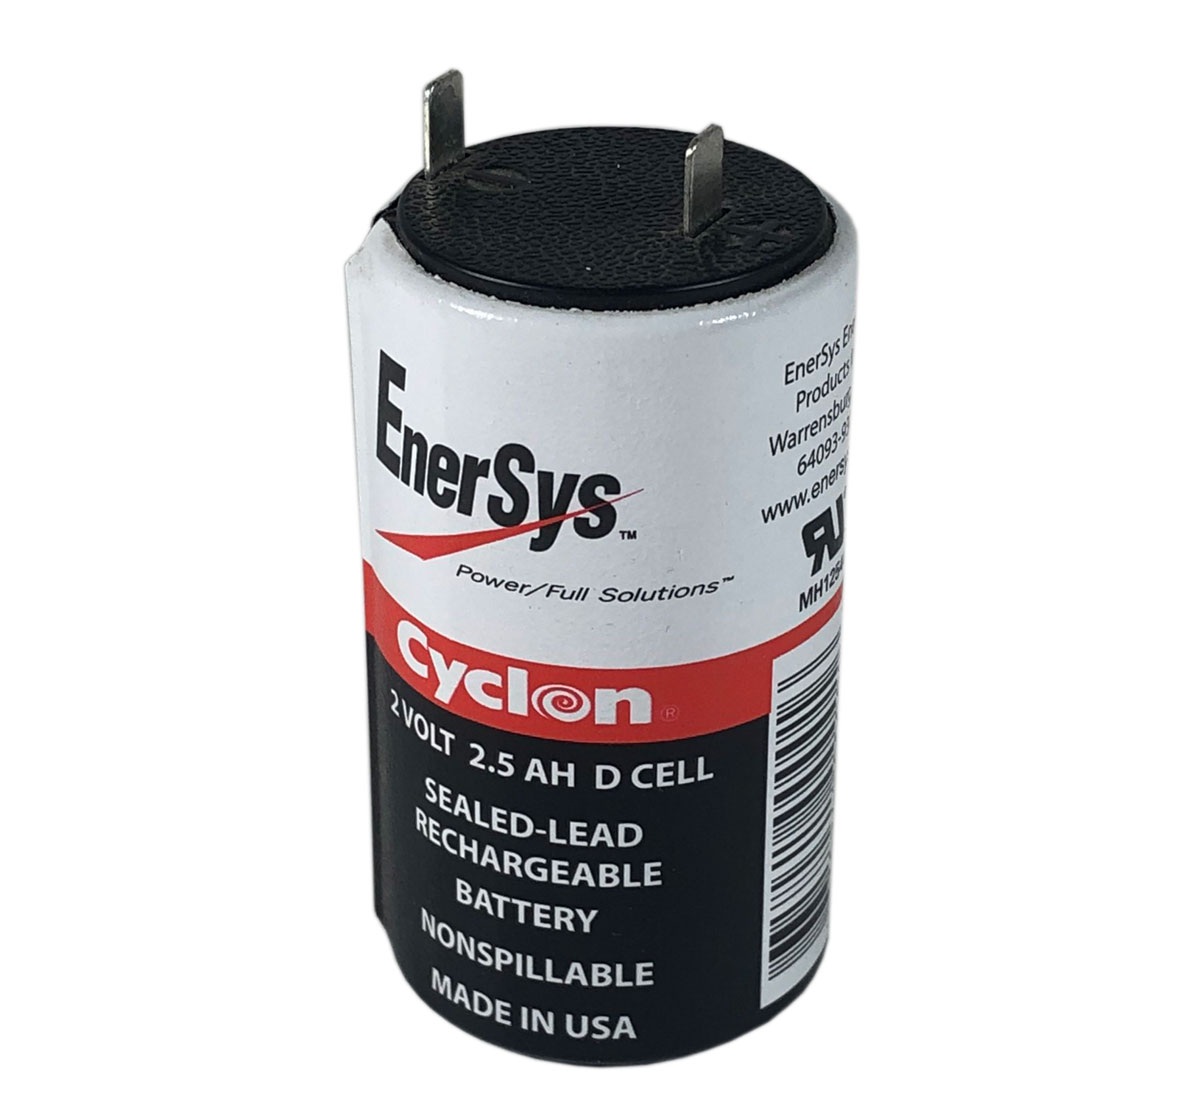 Enersys Hawker 0810-0004 Cyclon 2V 2.5Ah D Cell Battery